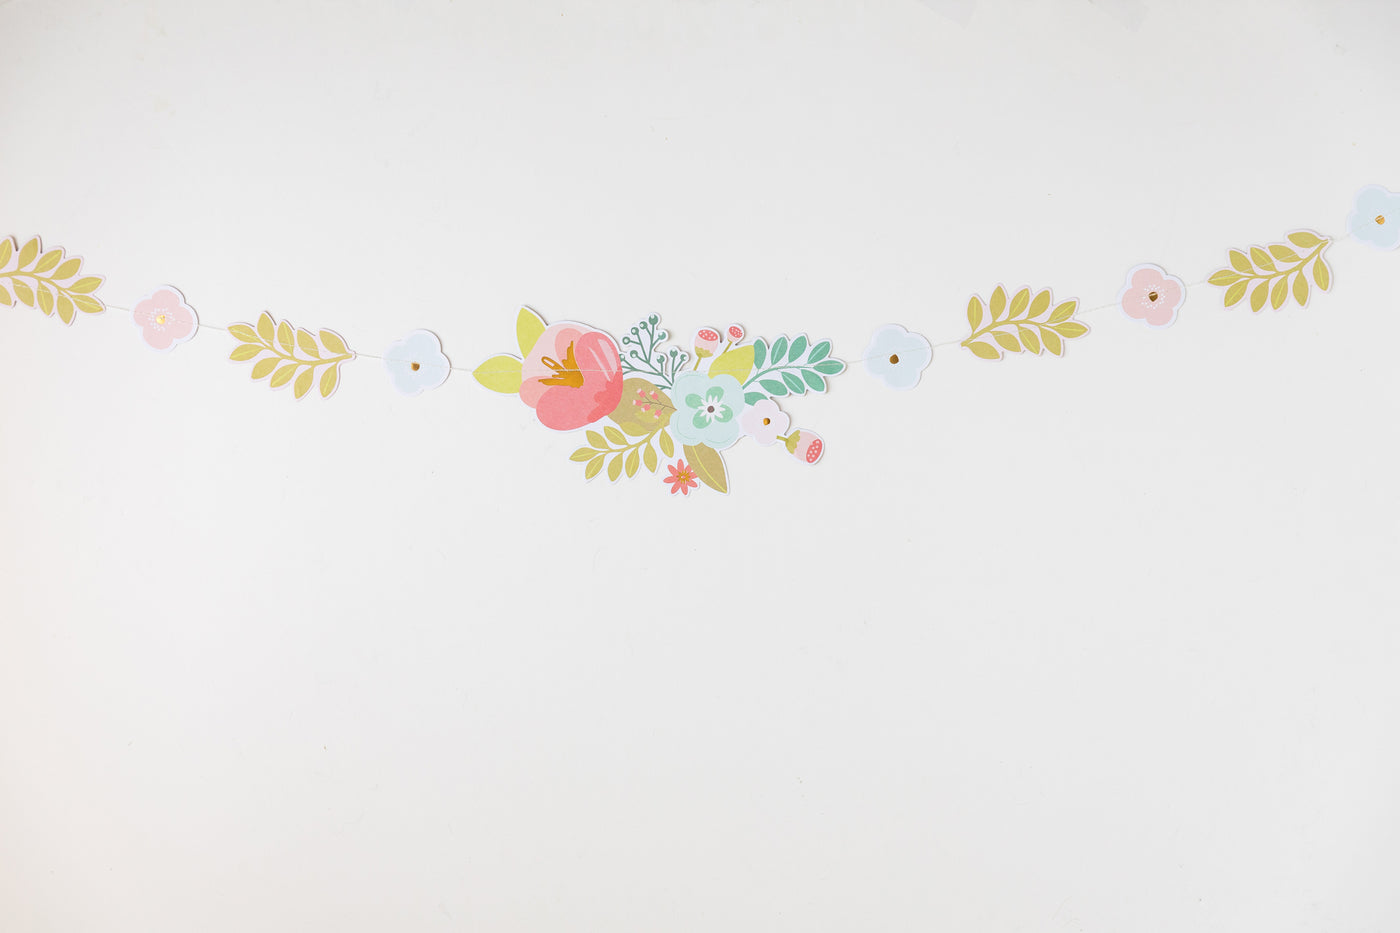 Garden Party Floral & Pennant Banner Set - My Mind's Eye Paper Goods